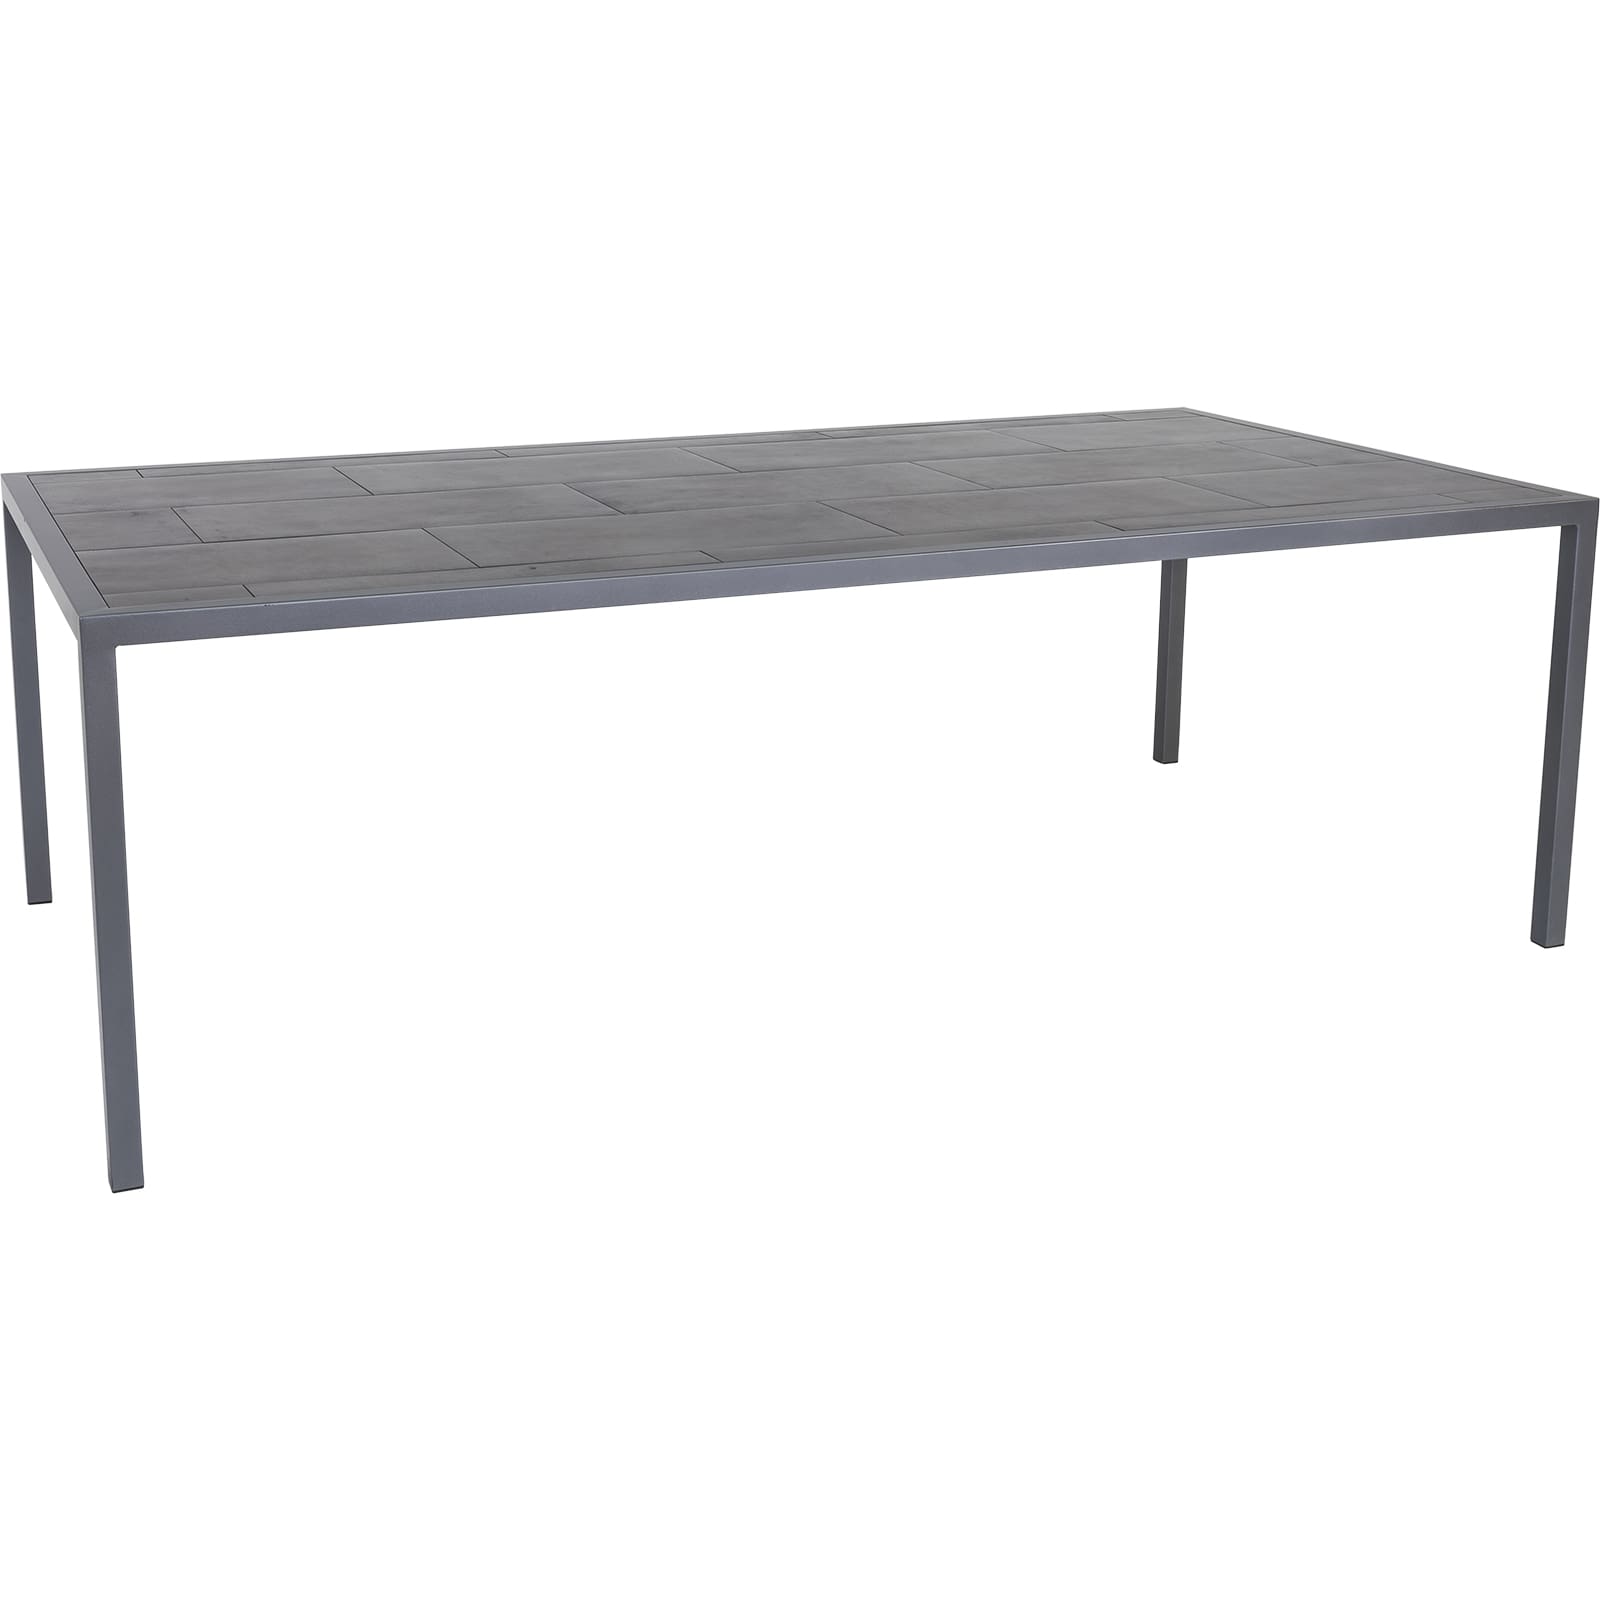 45" x 87" Dining Table - Fully Welded Tables - Quadra Iron Tables 6